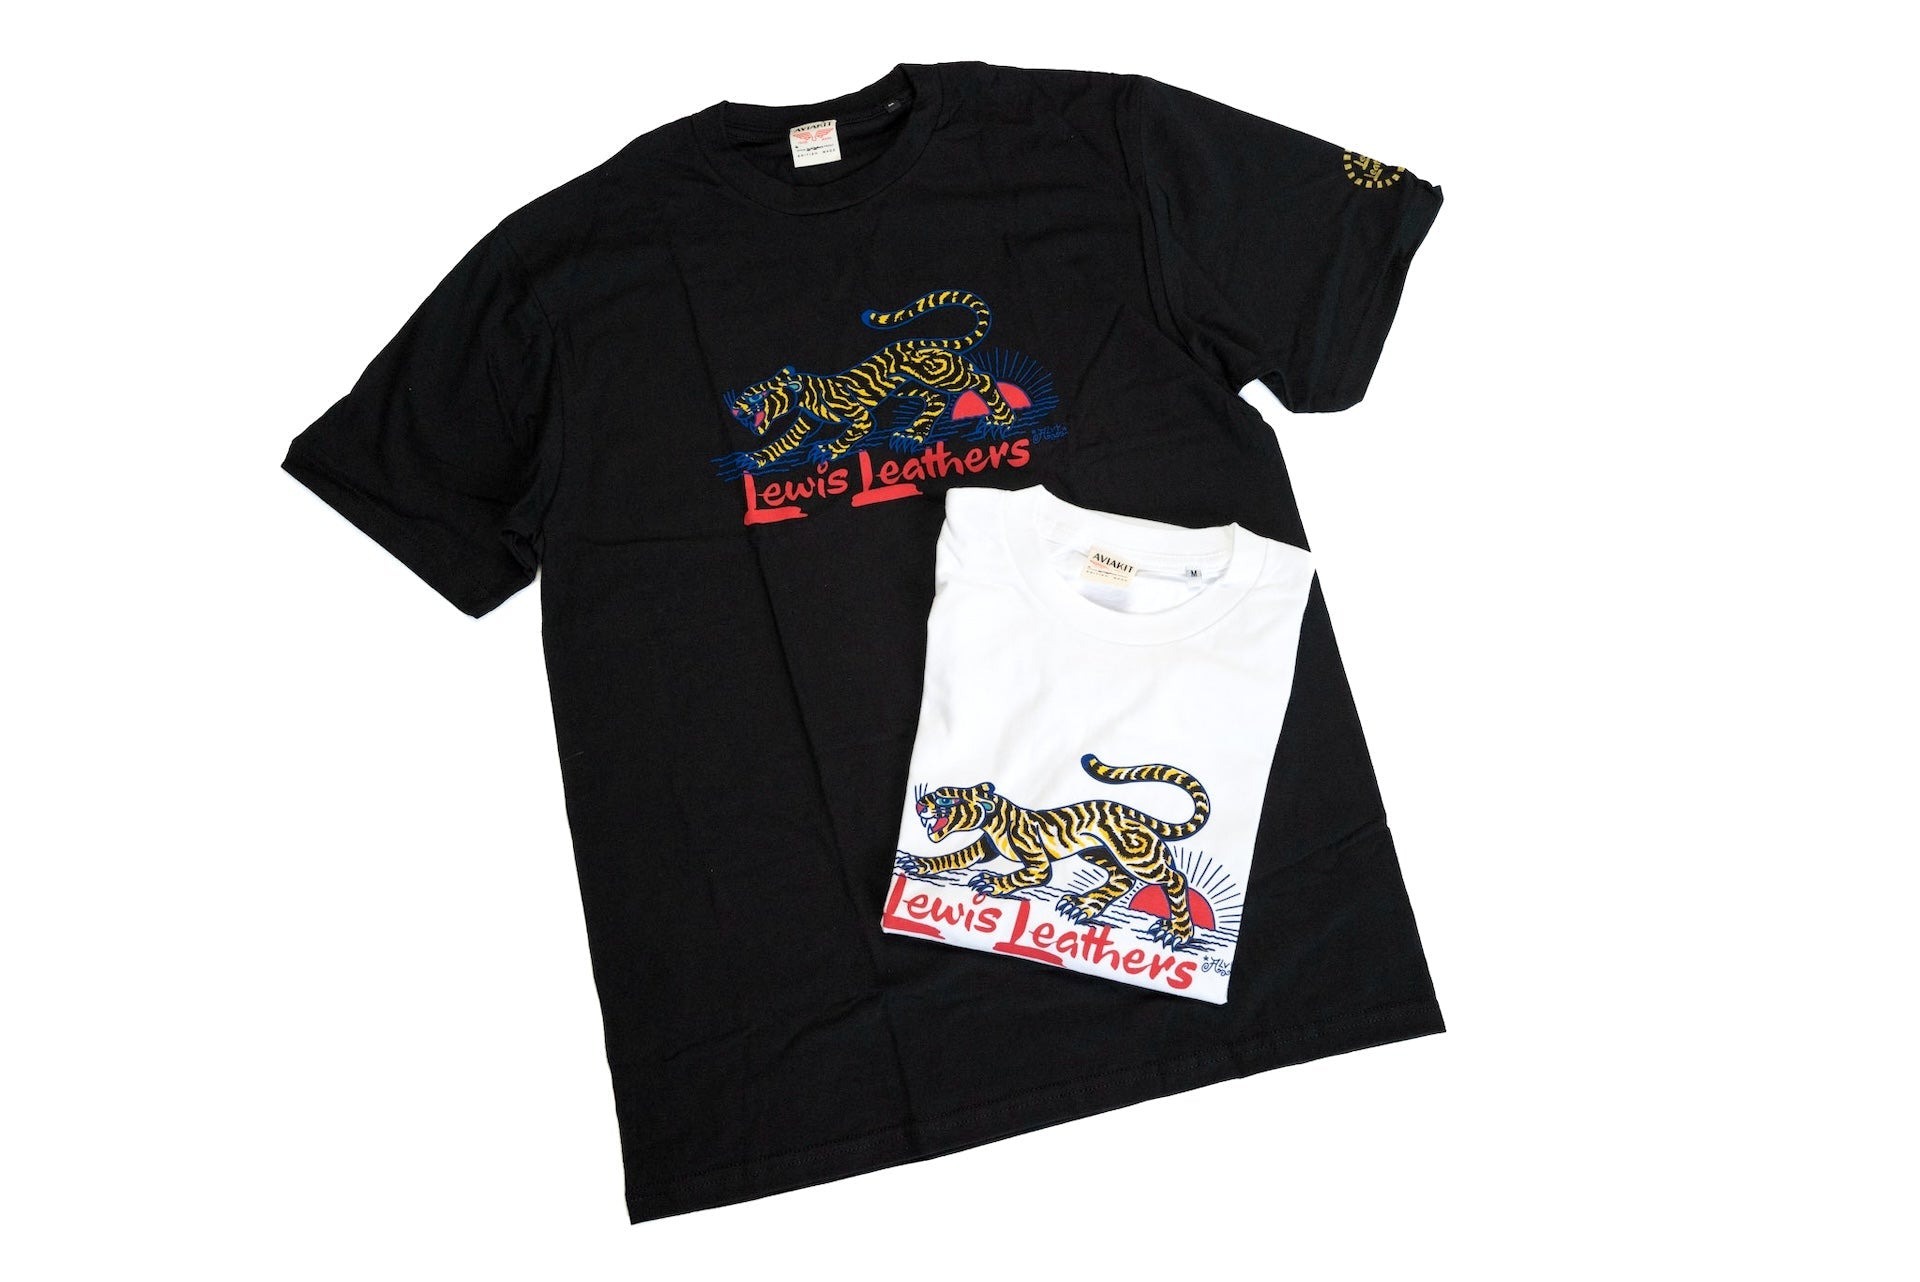 Lewis Leathers X Liam Alvy 'Prowling Tiger' Tubular Tee (White)